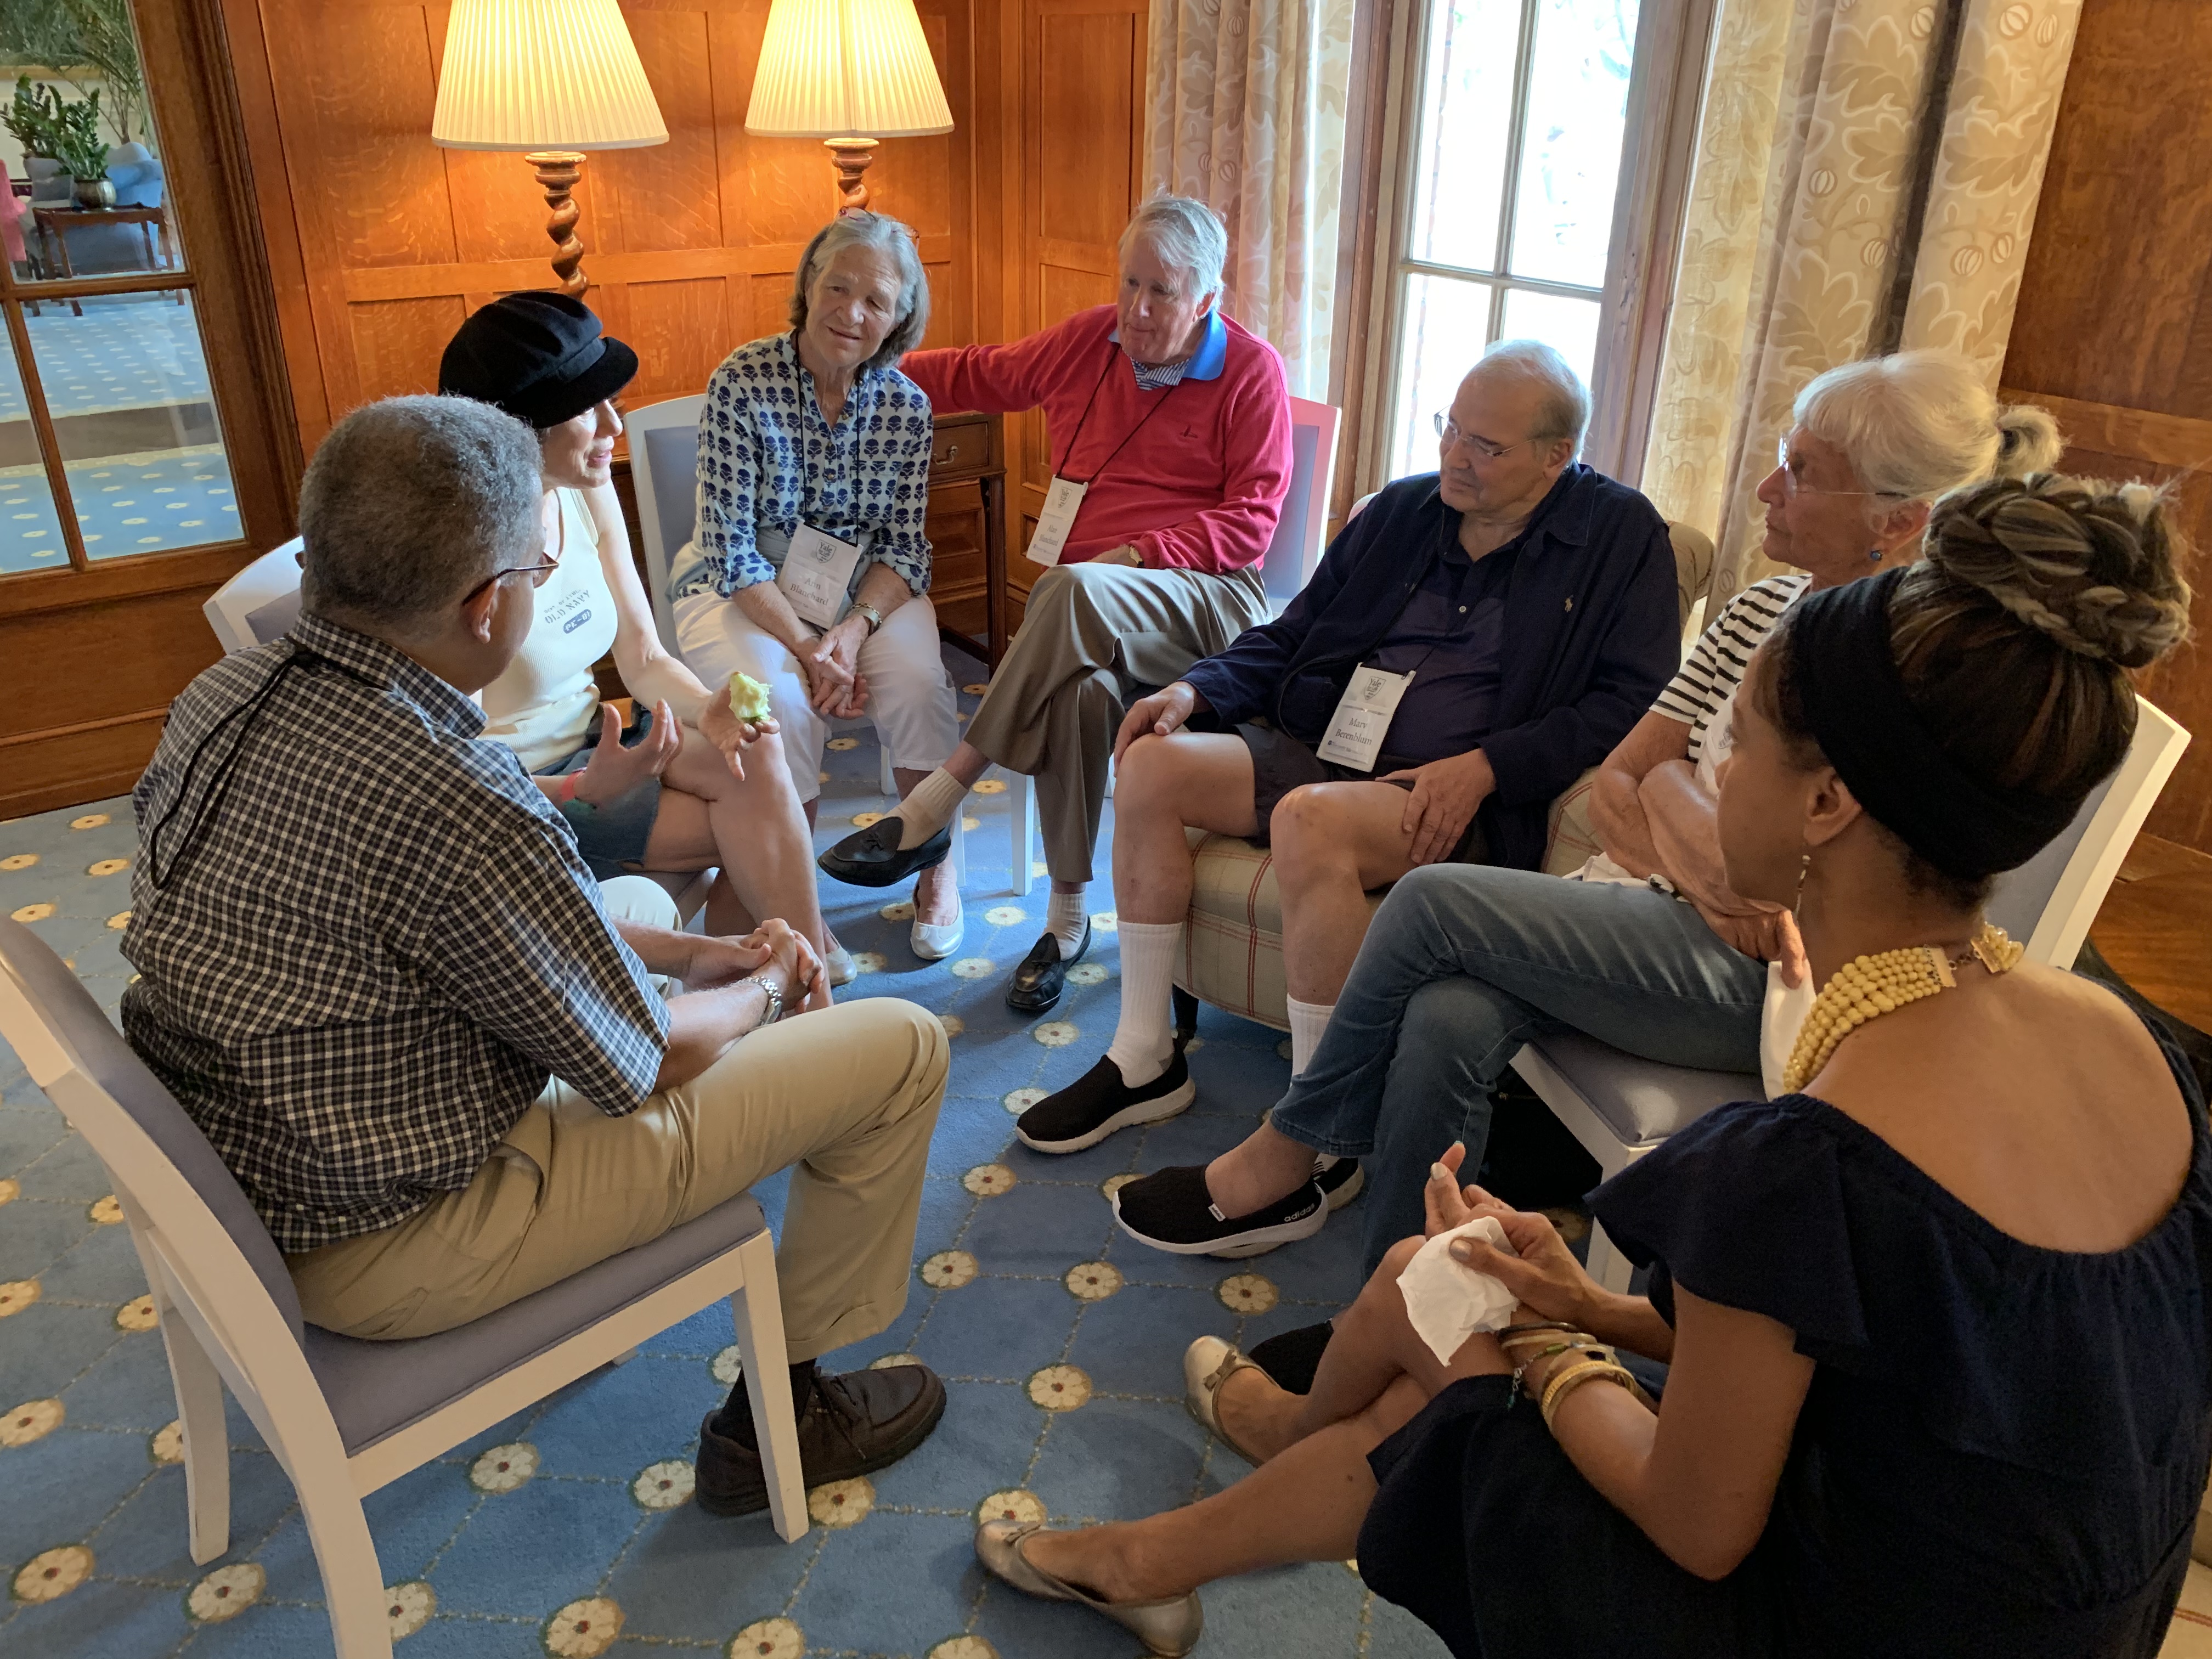 Group discussion during the 2019 Glimmerglass Festival